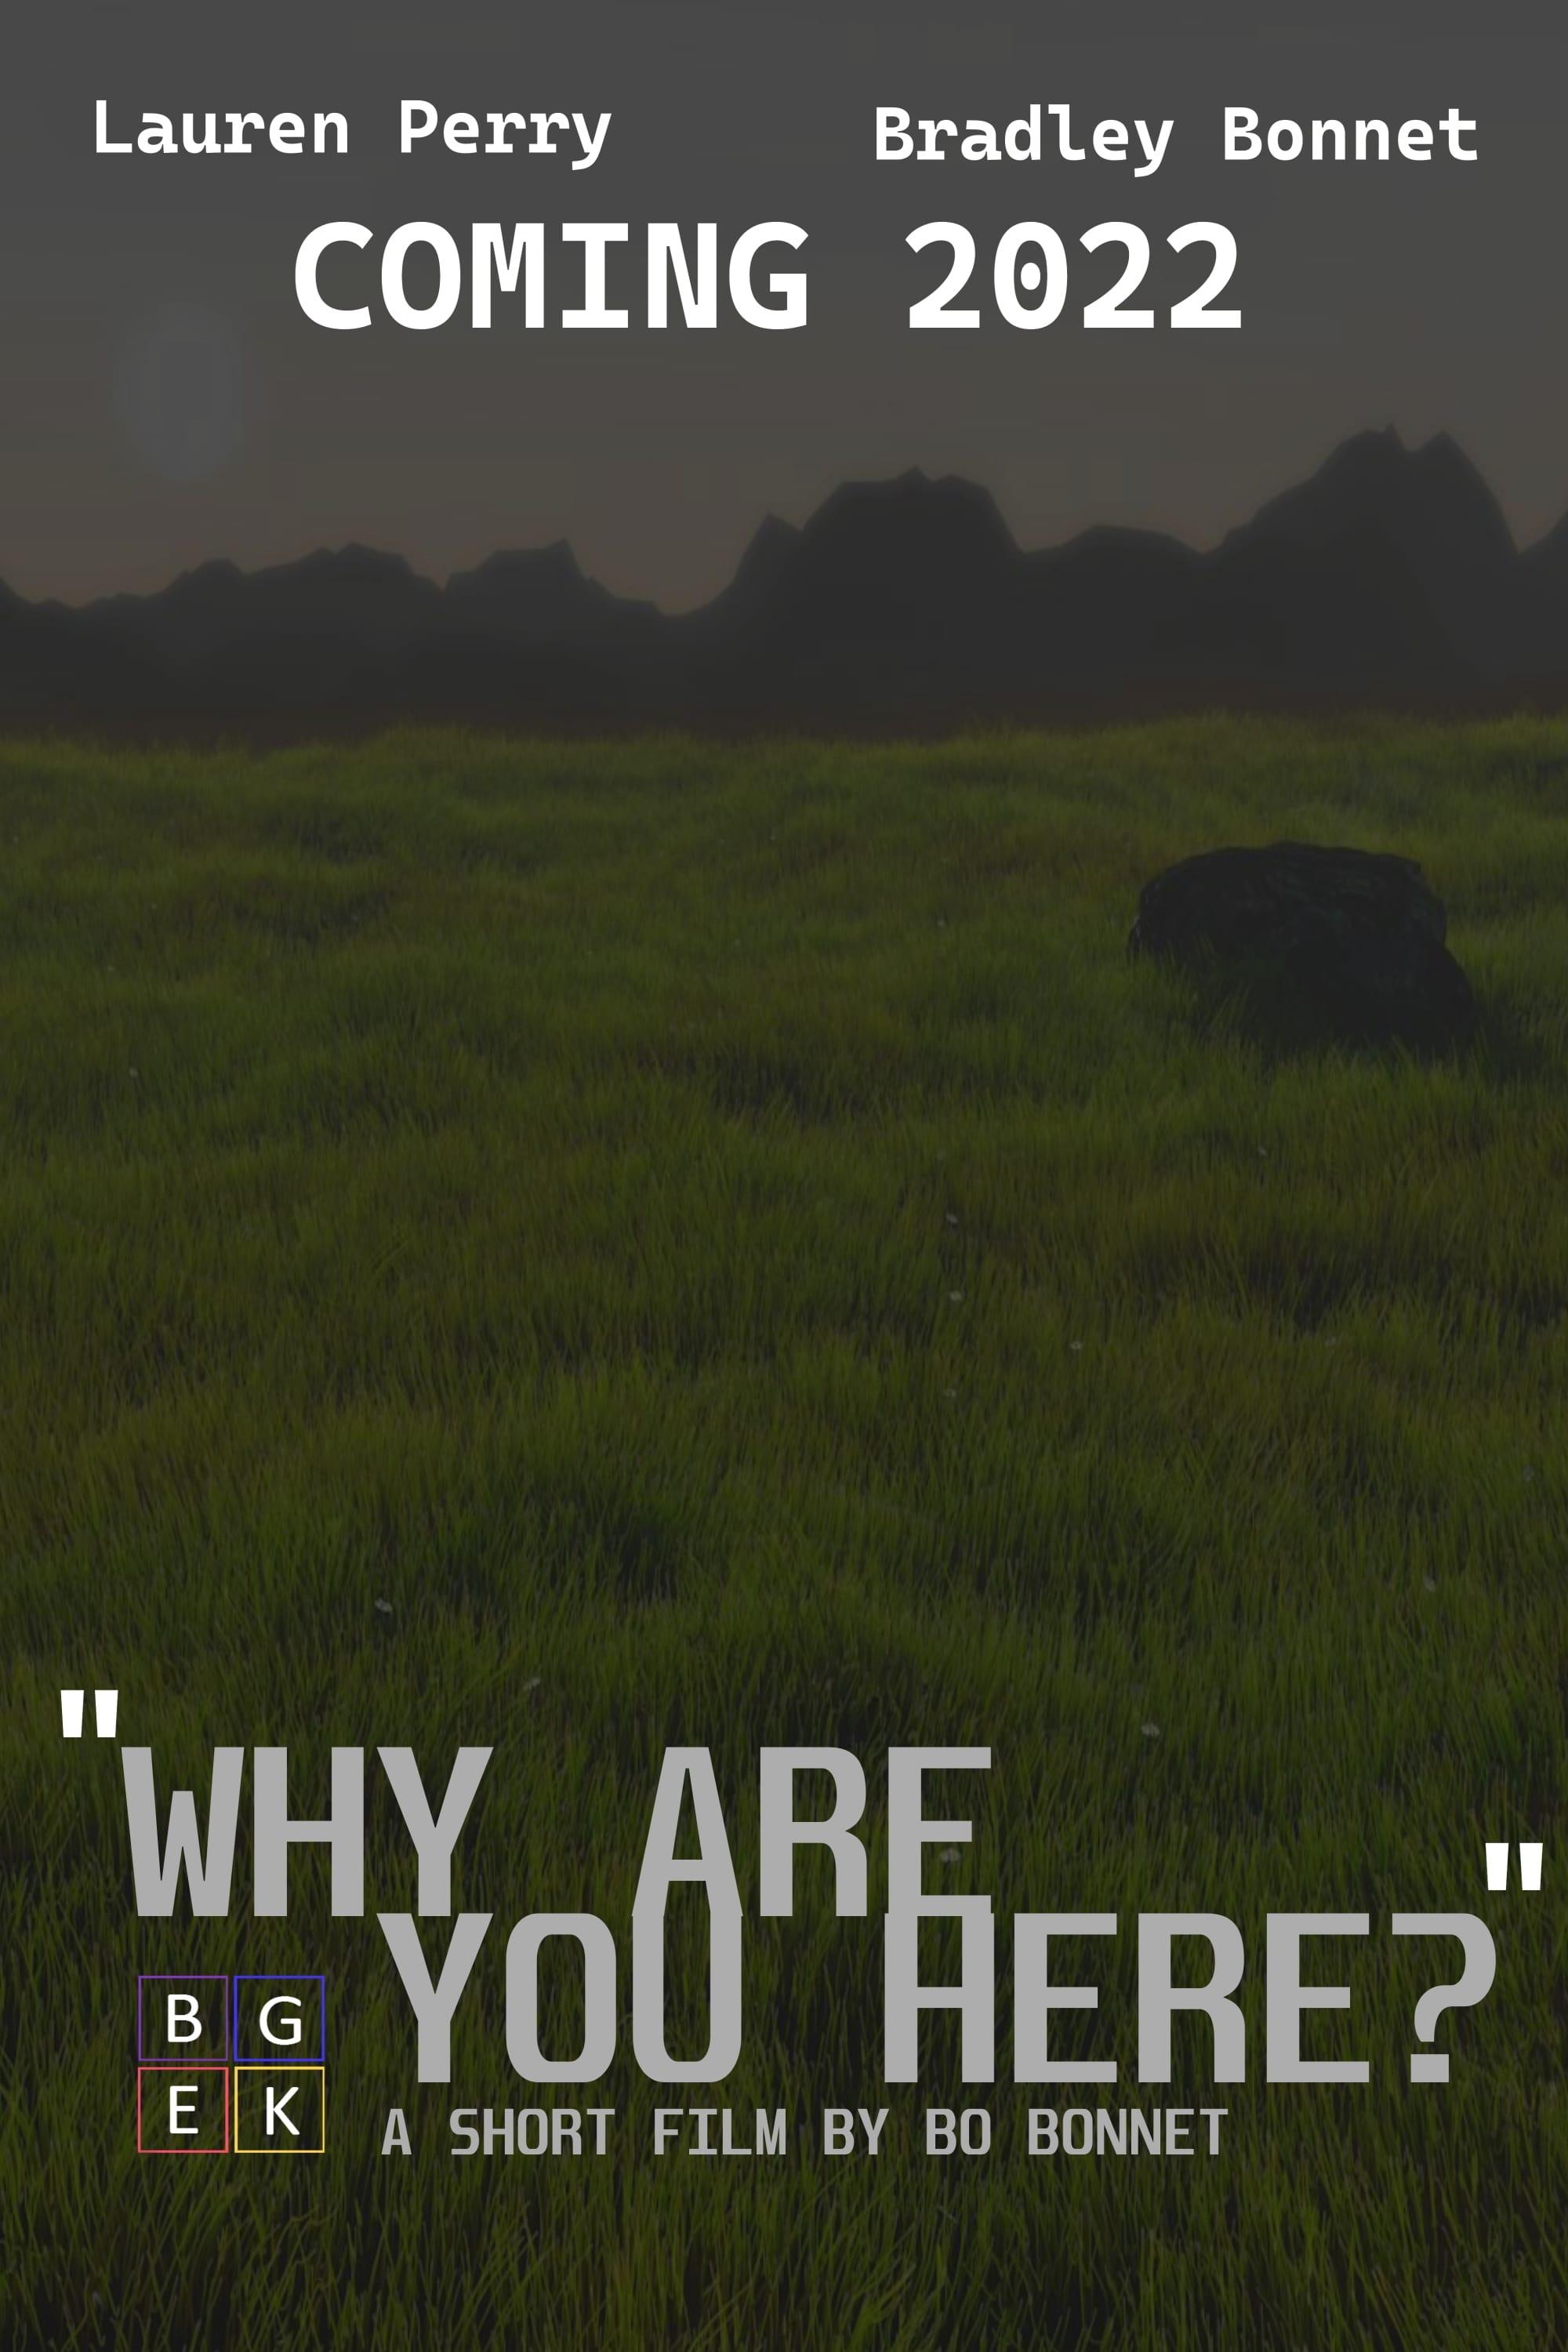 "Why Are You Here?" poster